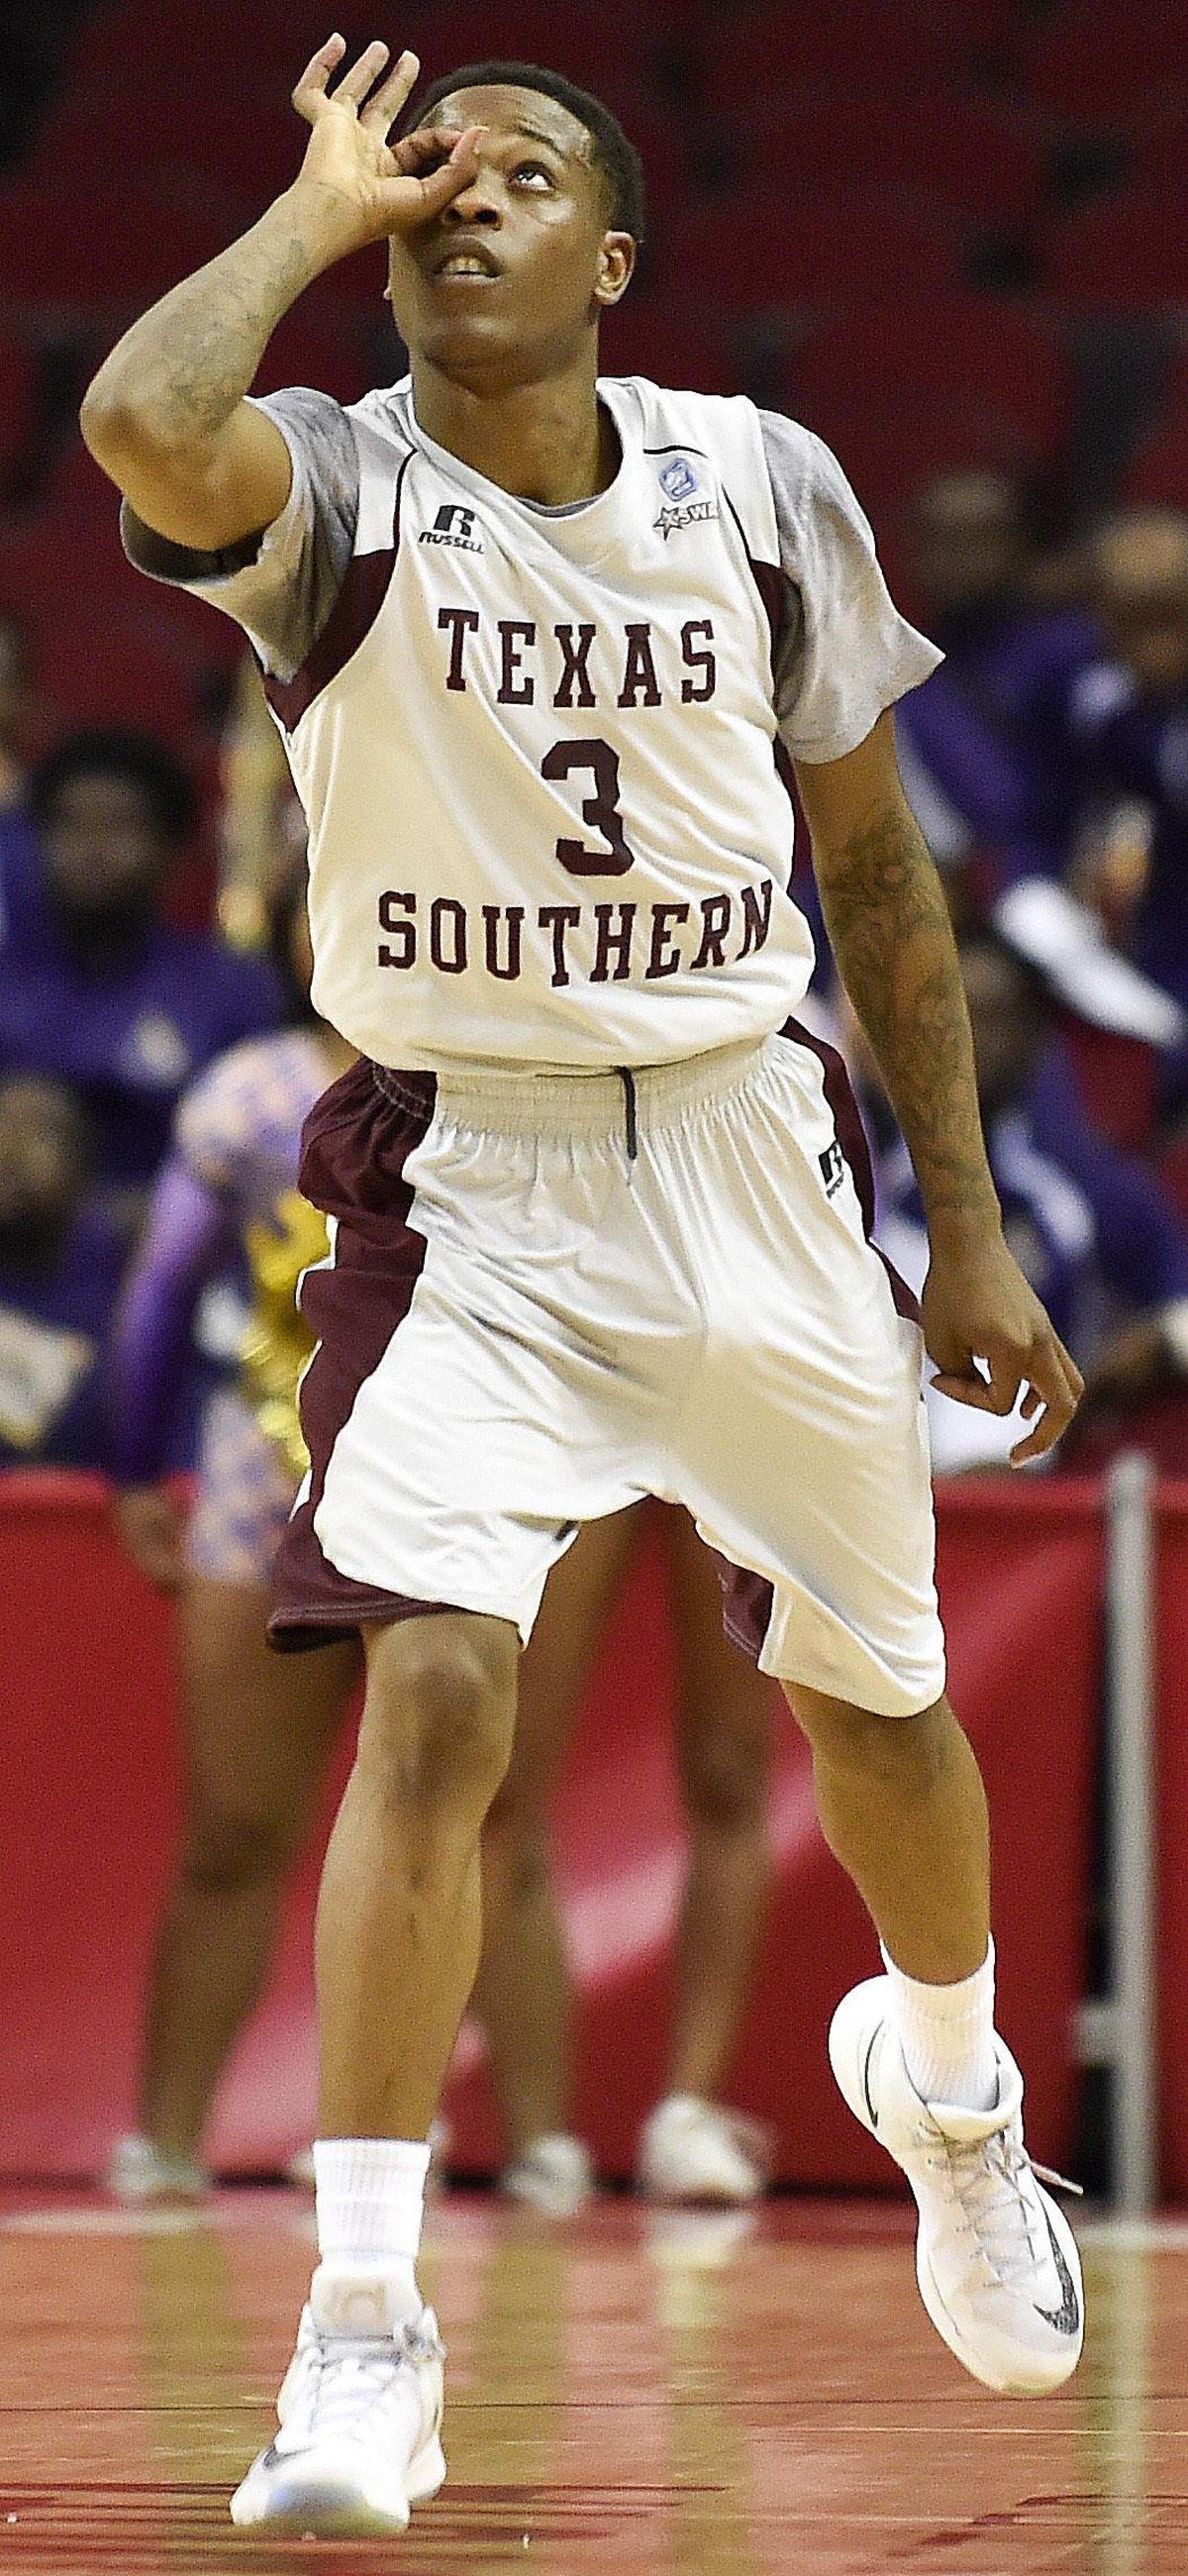 Texas Southern guard Demontrae Jefferson reacts after making a 3-point shot against Alcorn State in last year’s SWAC Tournament title game. (Eric Christian Smith / Associated Press)